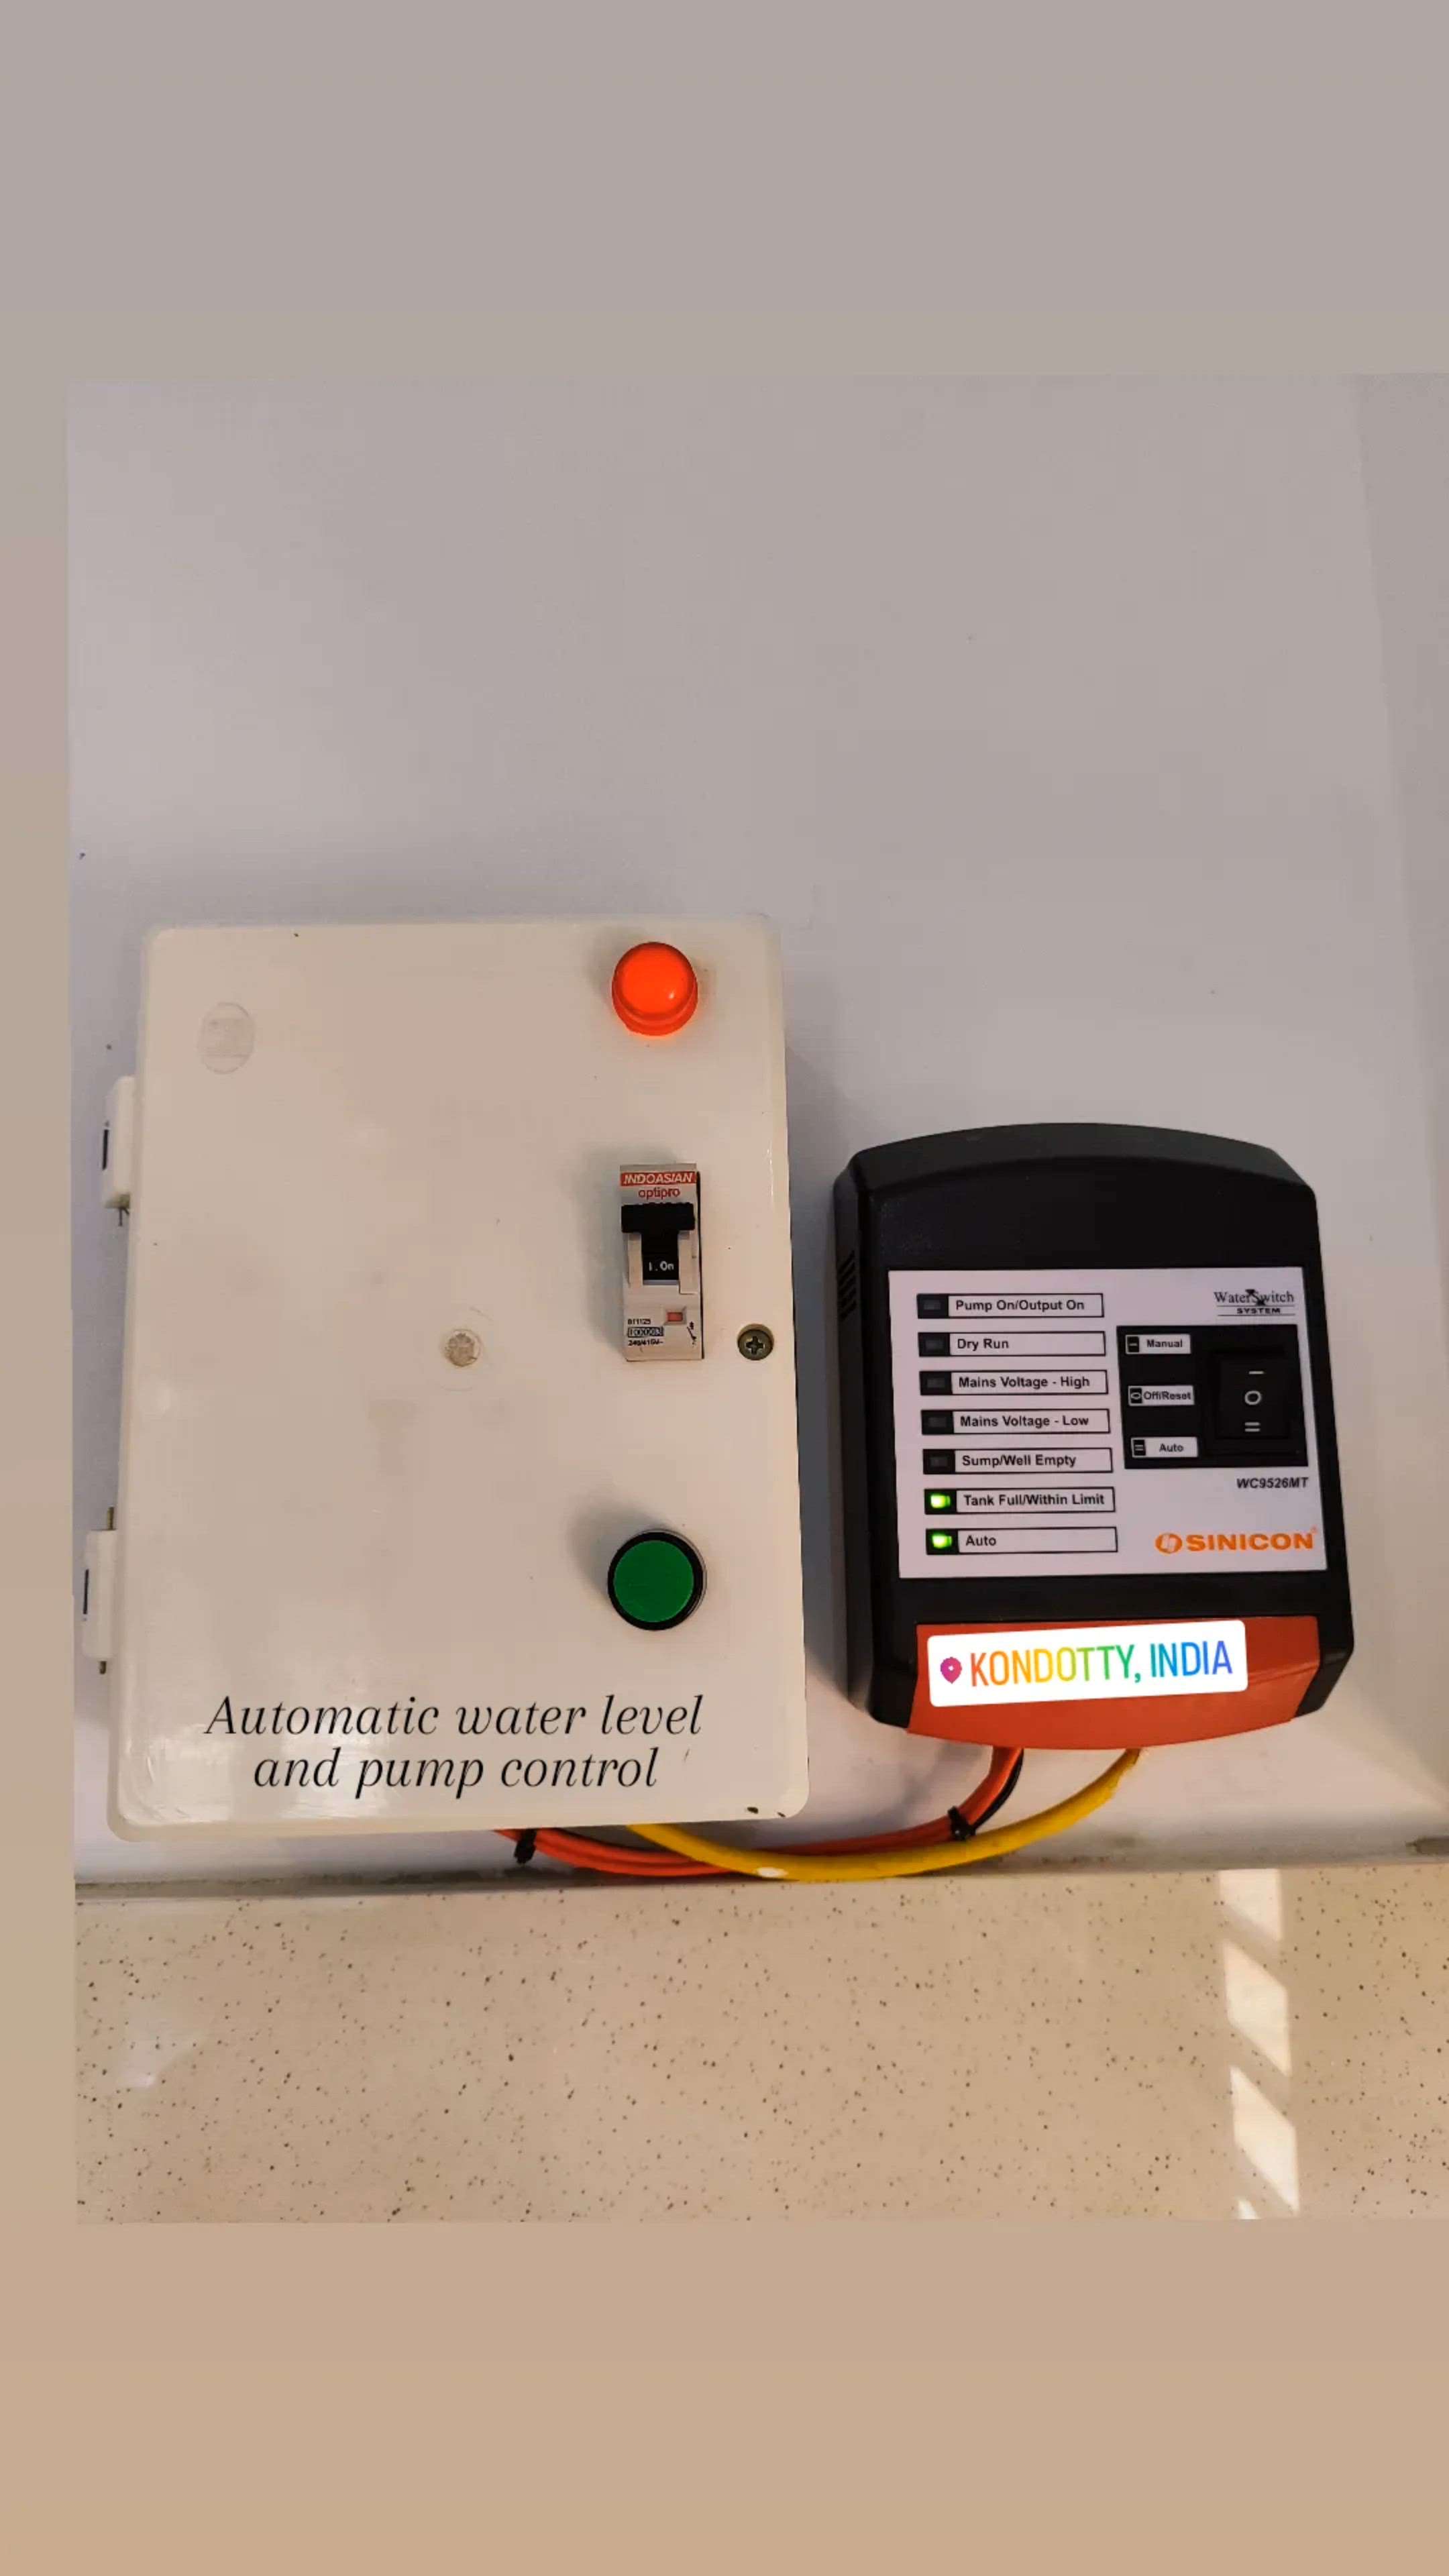 water pump controler and water level control#watersupply  #waterlevelcontroller  #pump  #pumber  #waterstorage  #watersupply  #water #automated  #SmartTank  #automationsolution